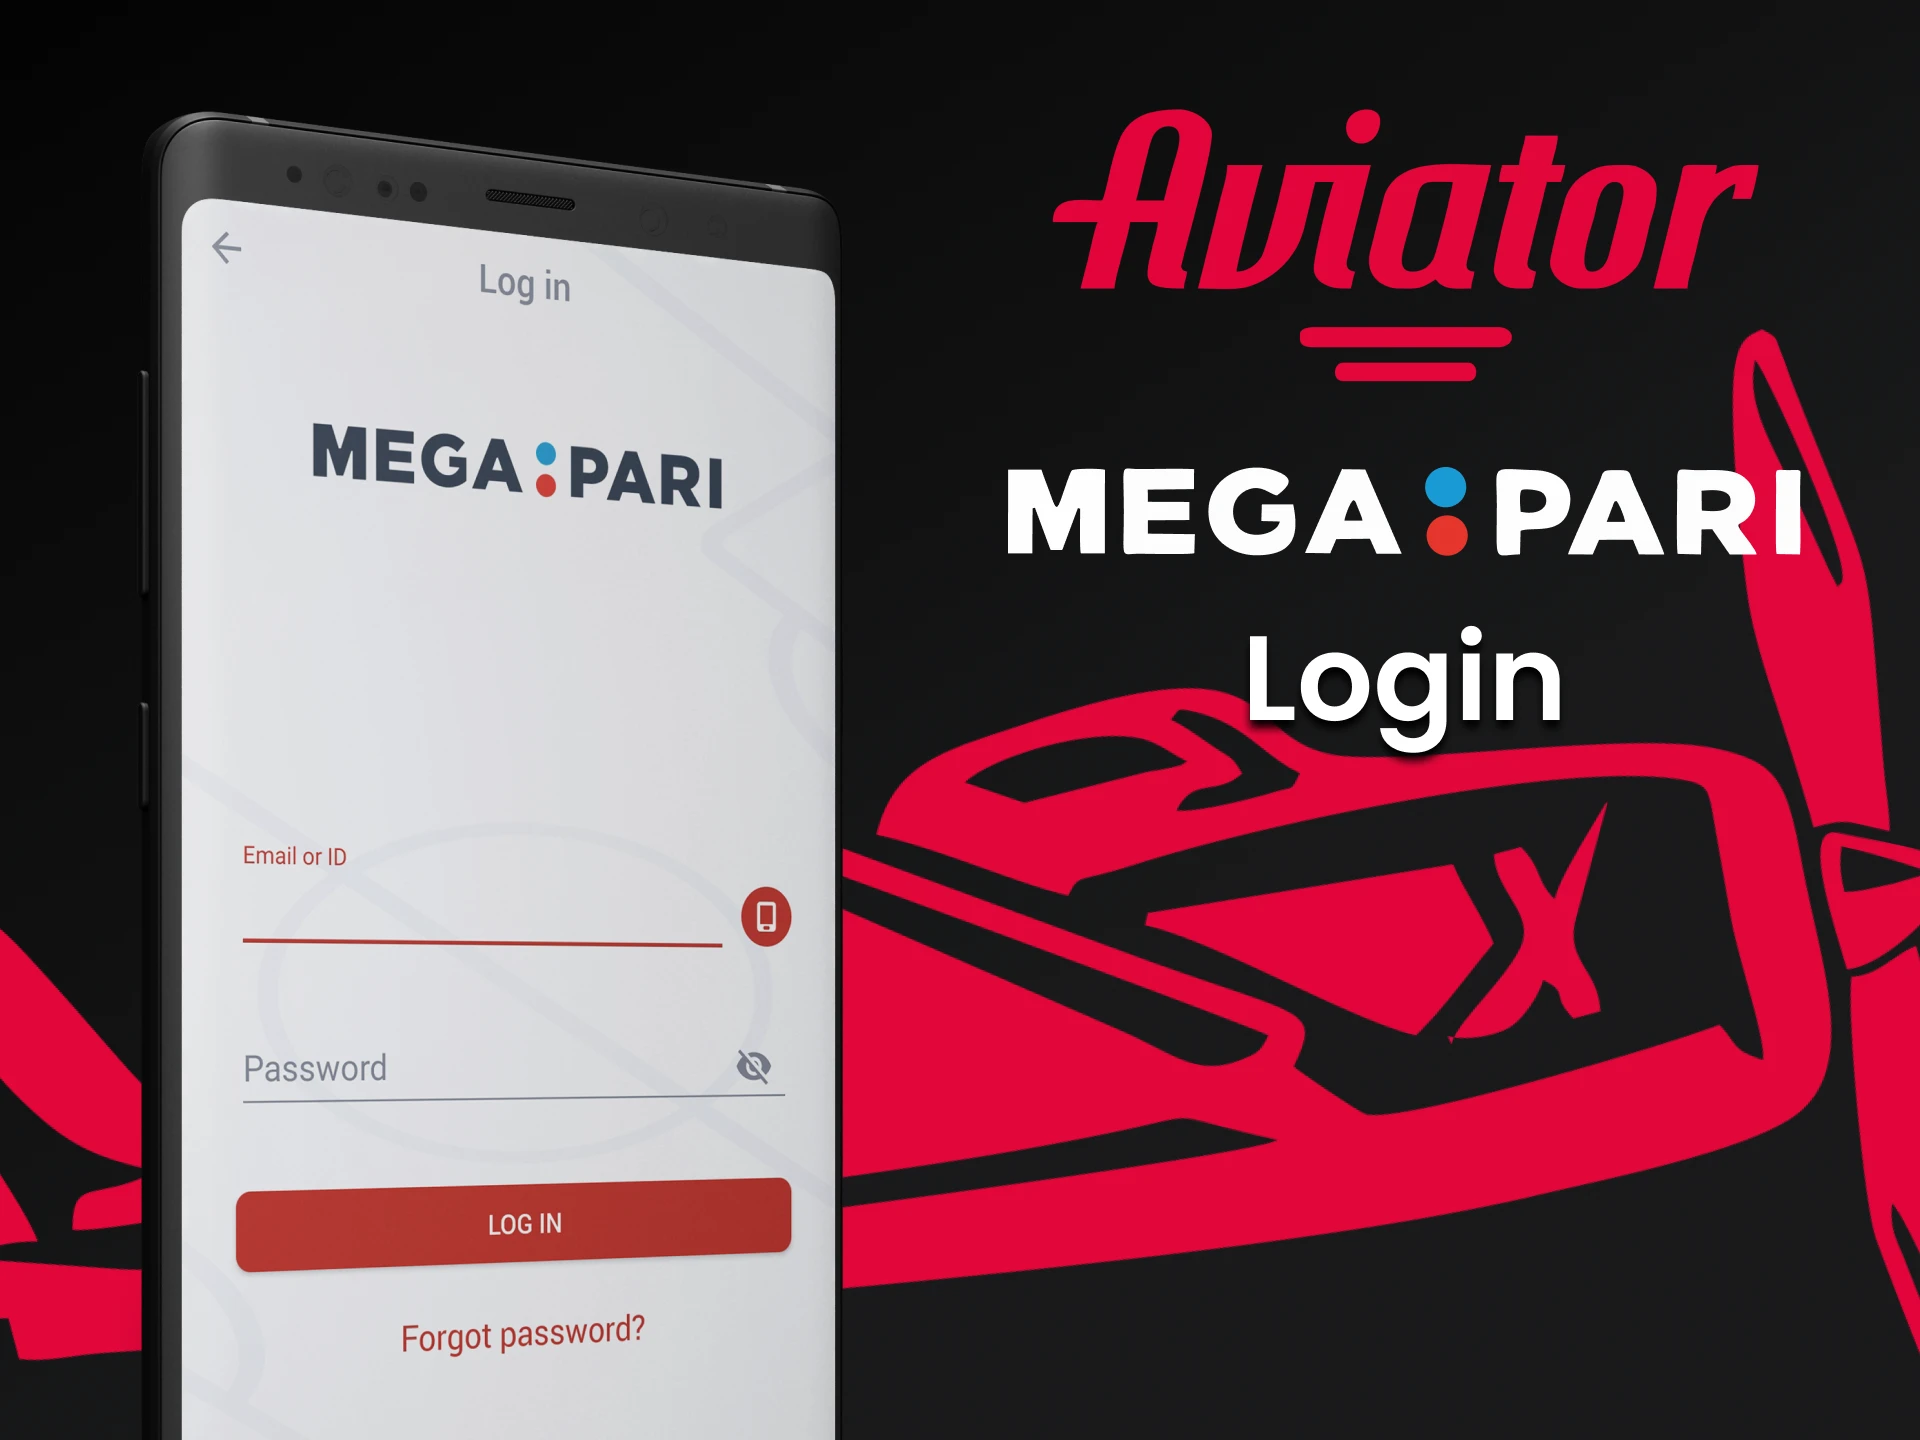 Log in to your personal account through the Megapari application.